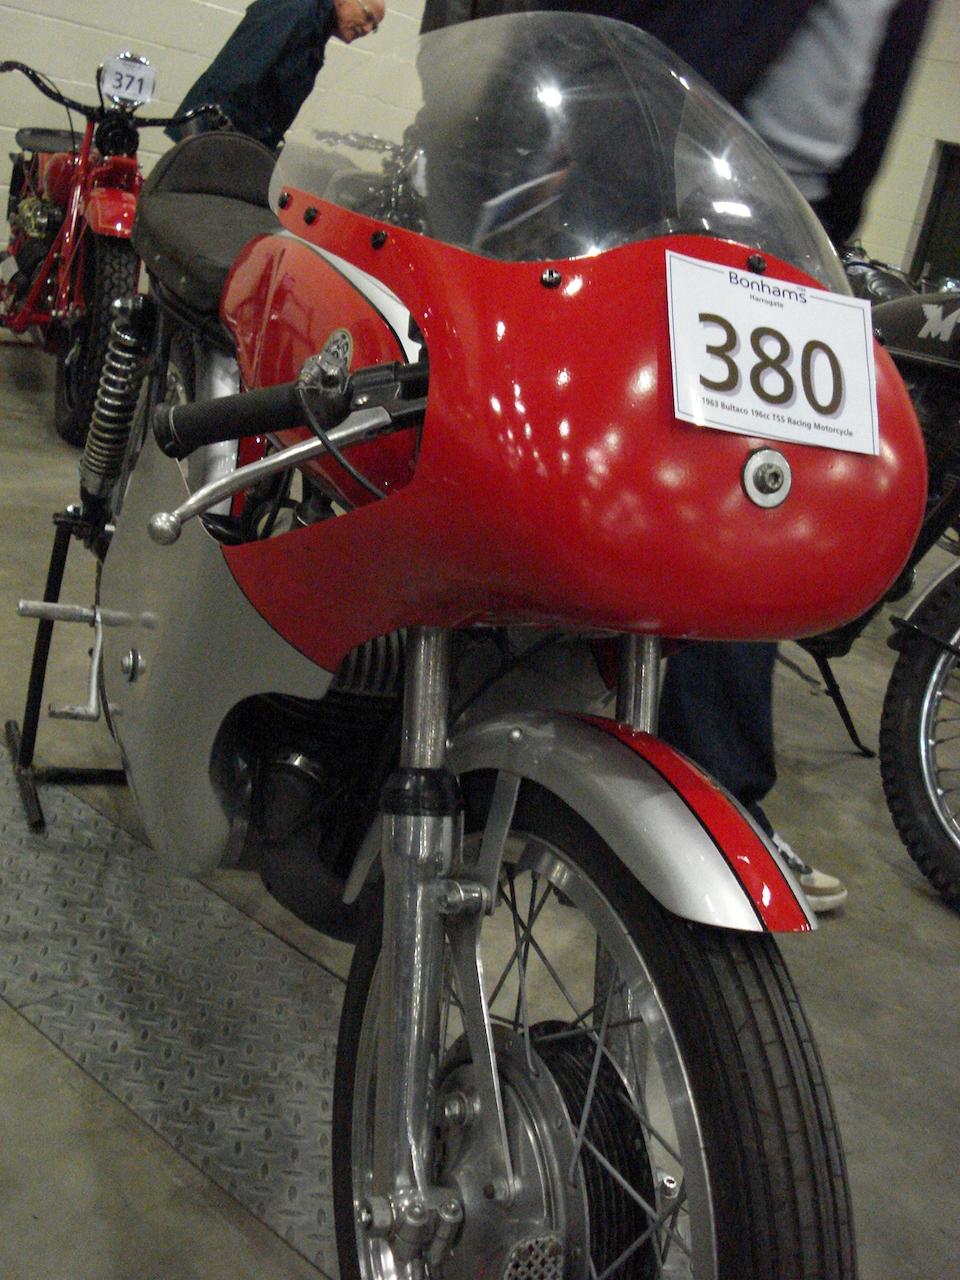 c.1963 Bultaco 196cc TSS Racing Motorcycle Frame no. to be advised Engine no. to be advised